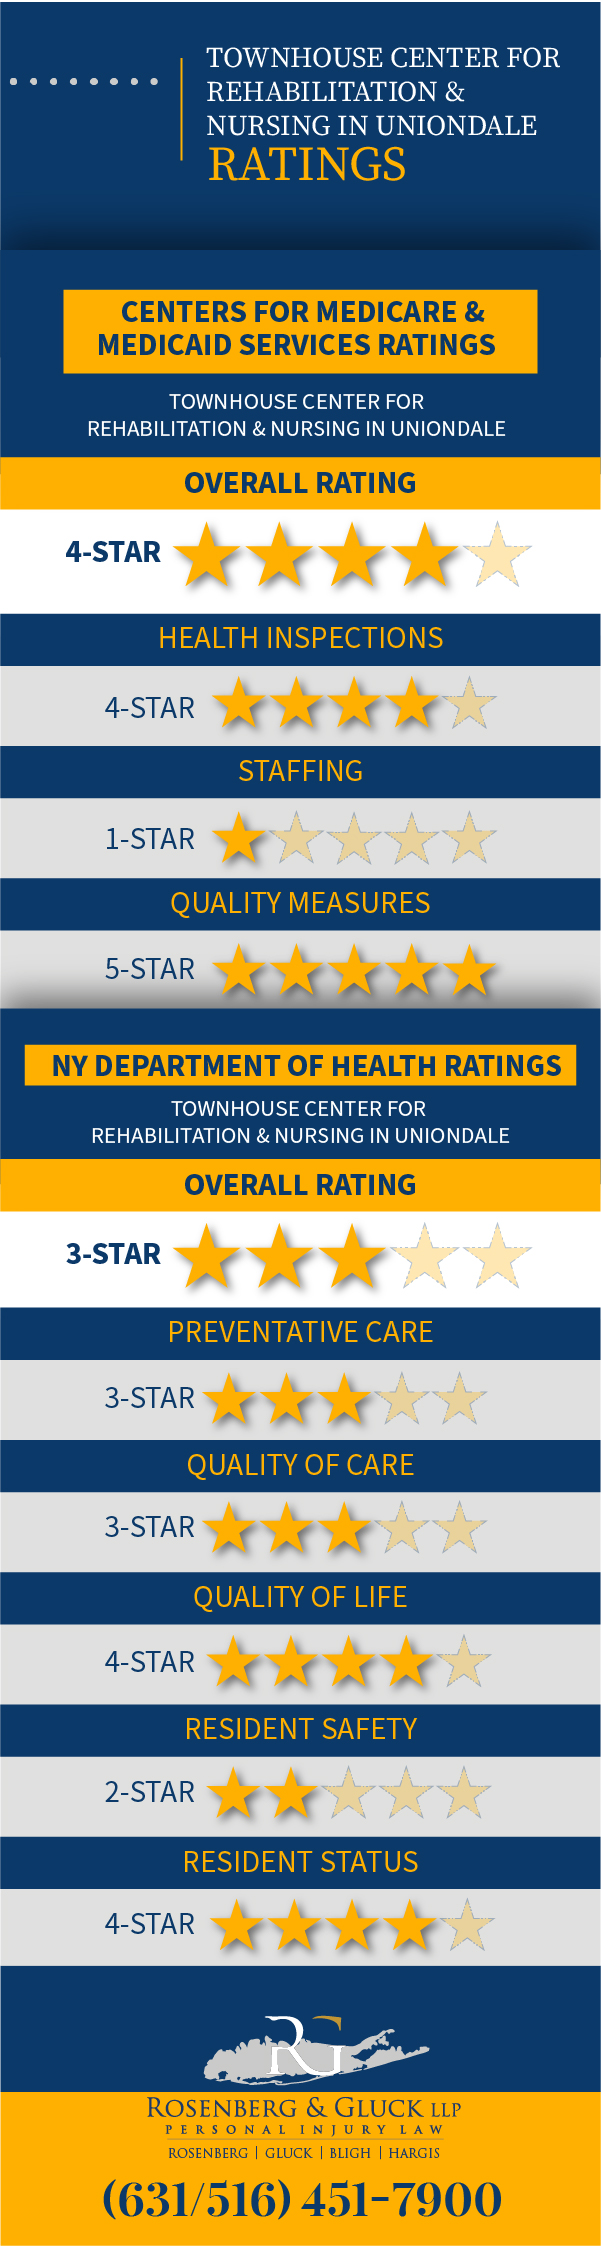 Townhouse Center for Rehabilitation & Nursing in Uniondale Violations and Ratings Infographic